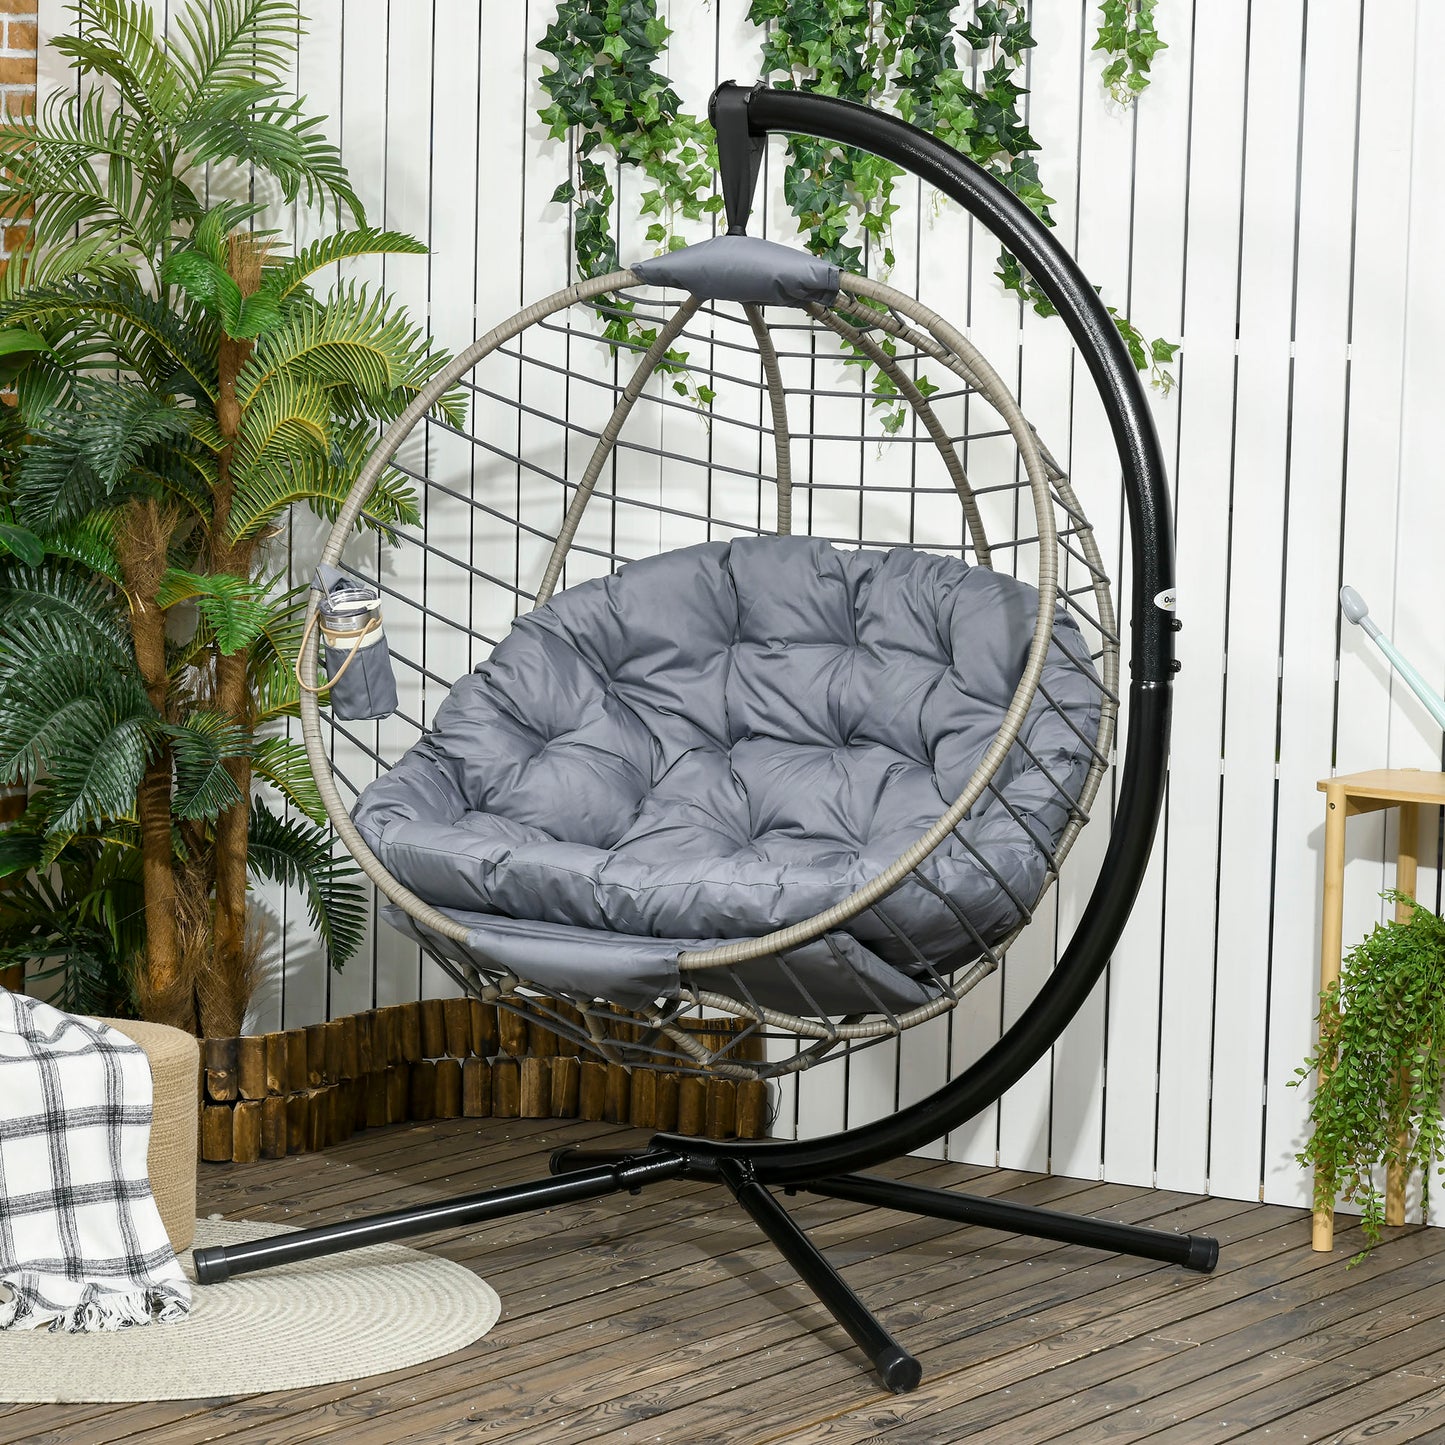 Rattan Foldable Swing Chair: Outdoor Hanging Chair with Stand with Padded Cushion & Cup Holder in Grey